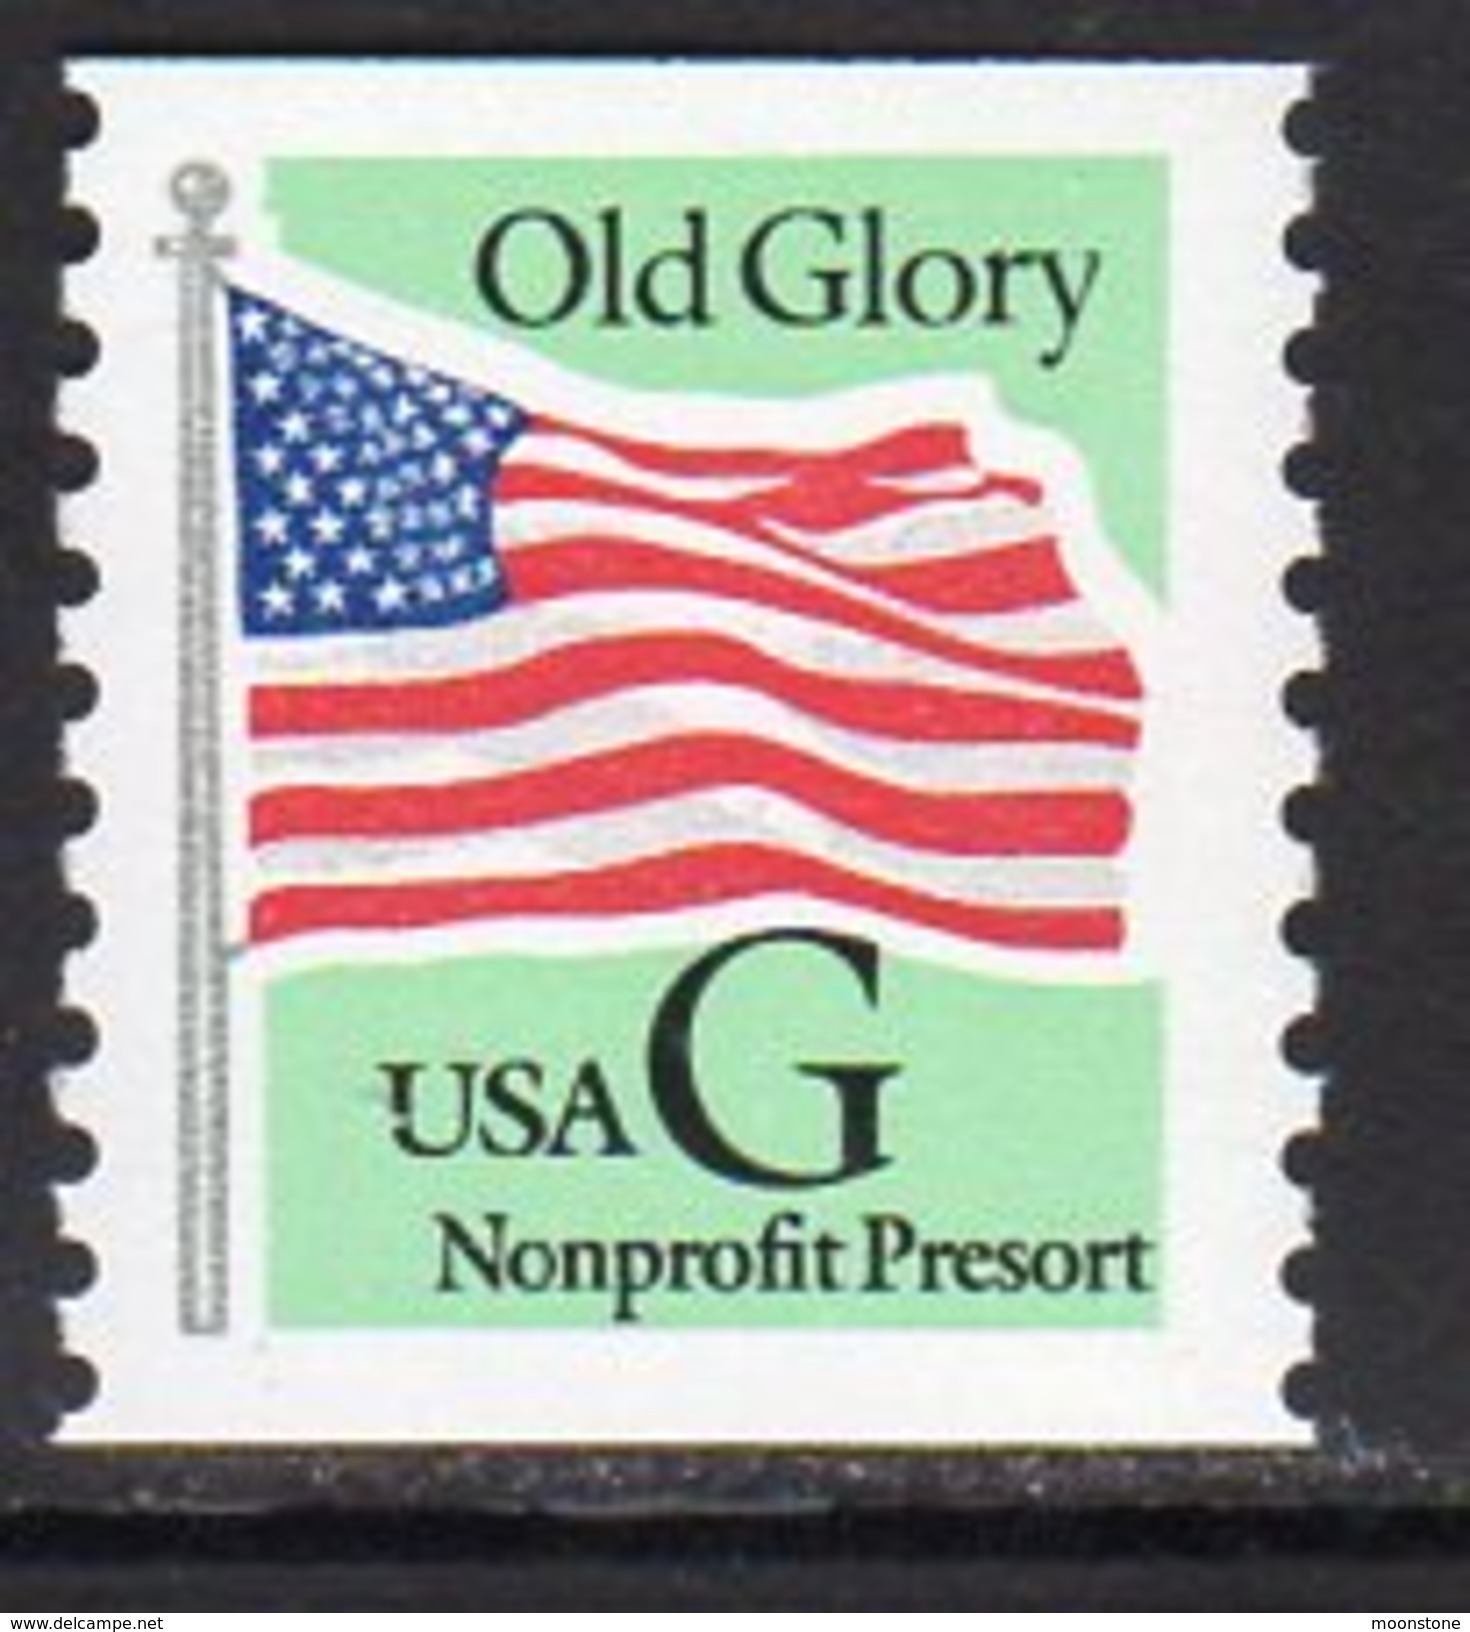 USA 1994 No Value Expressed G Old Glory Coil Stamp Non-profit Presort, Green Background, MNH (SG 2978) - Unused Stamps